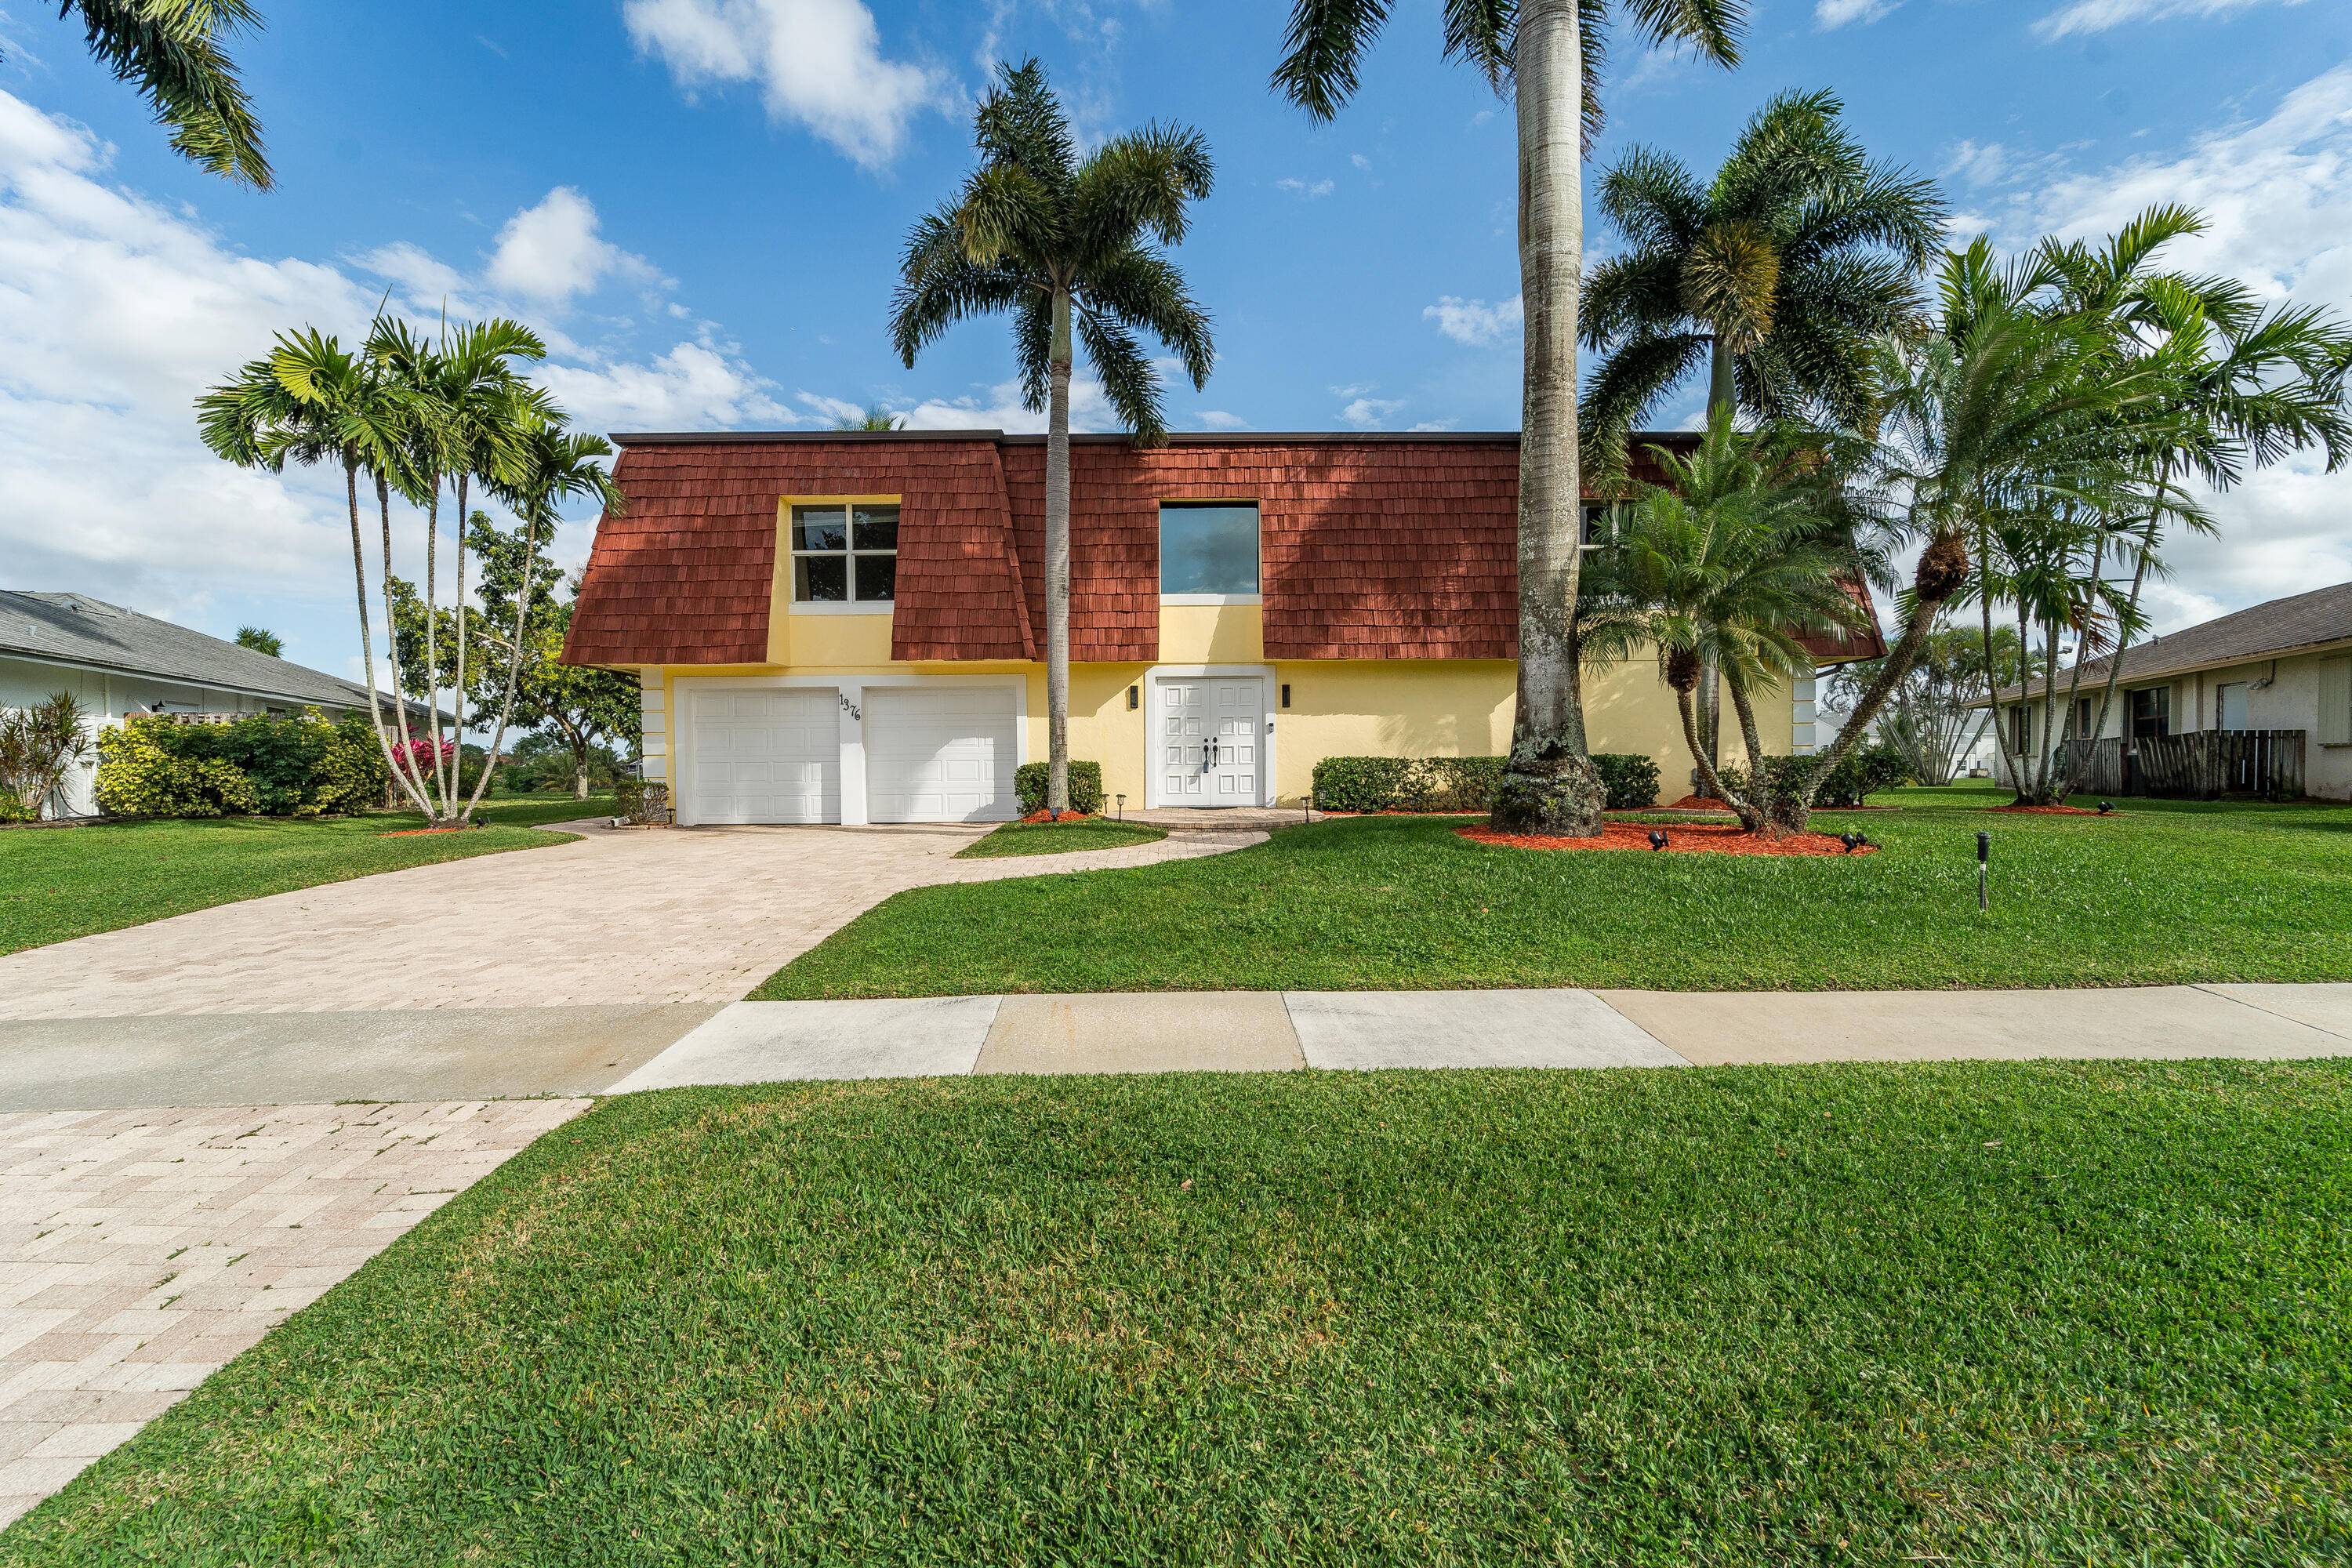 Discover waterfront living in Wellington, FL, with this luxurious 2, 772 sqft rental home on Sailboat Circle.